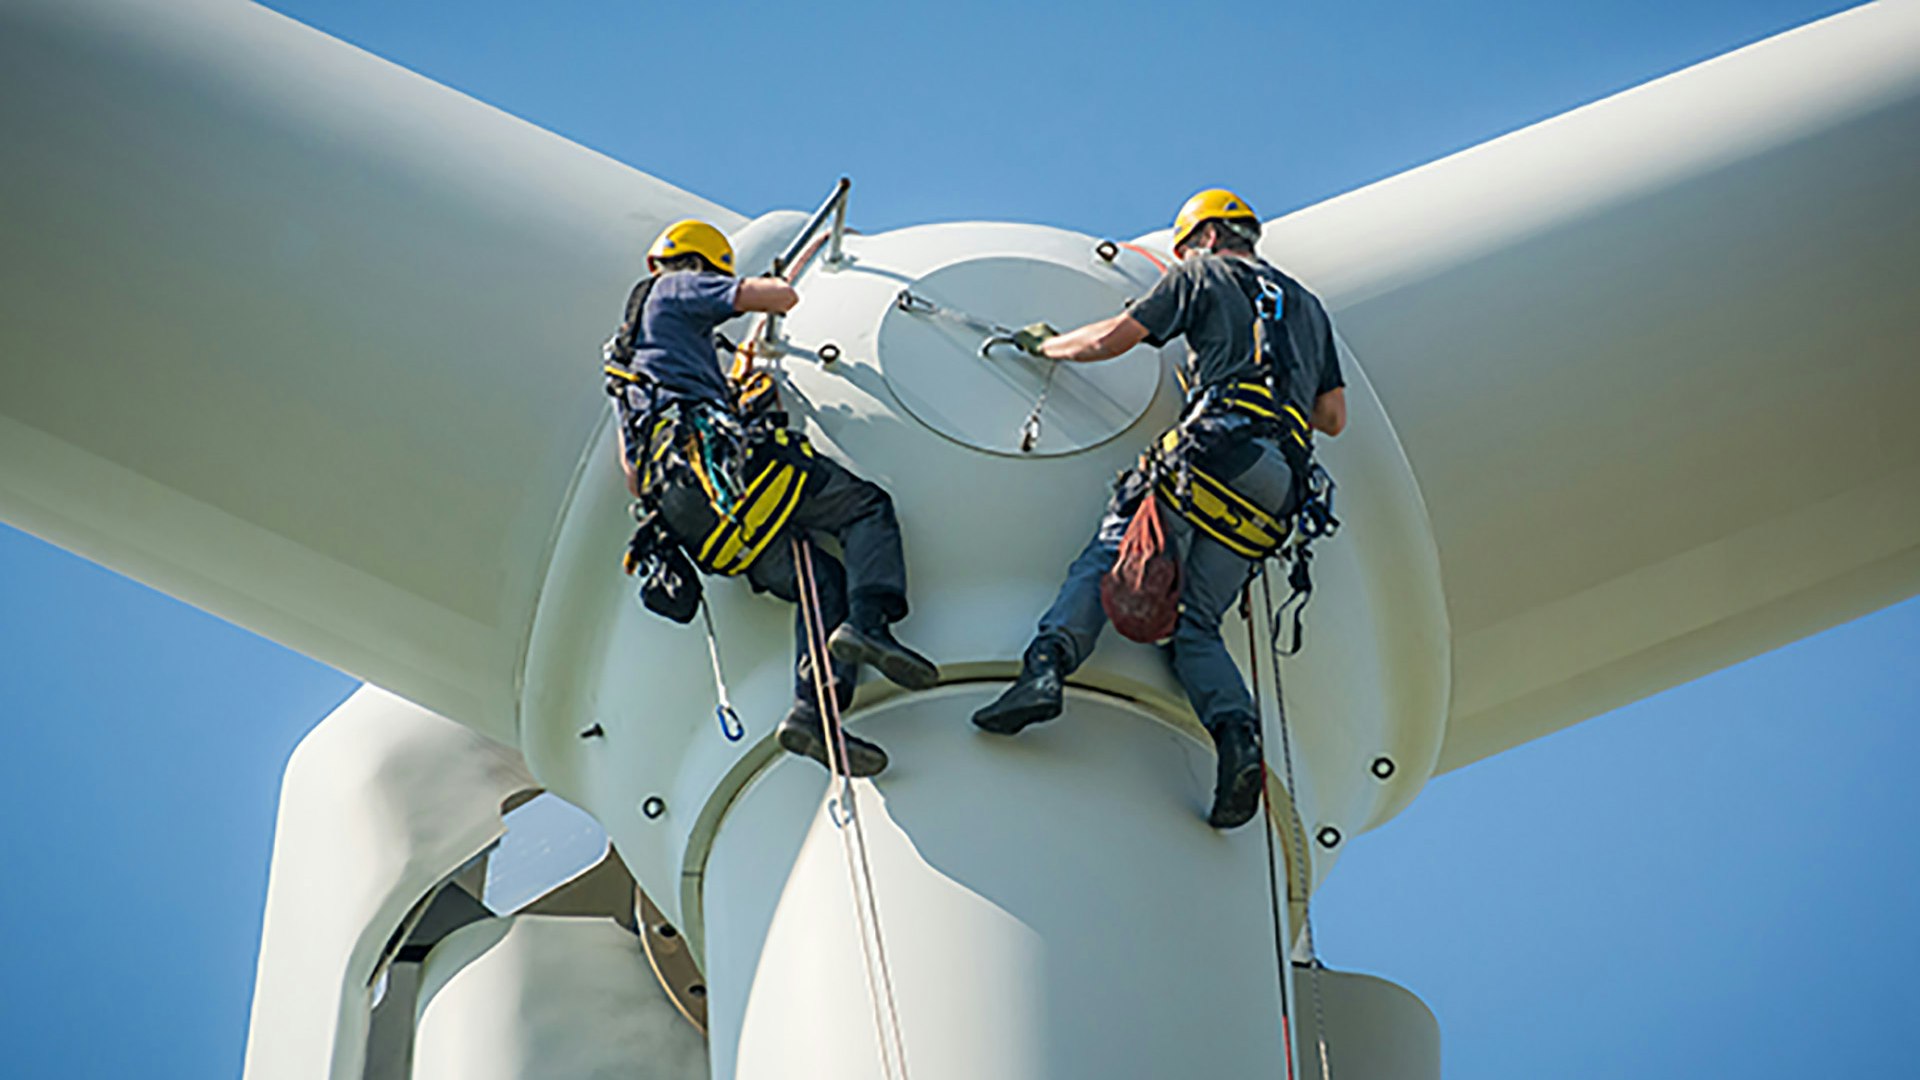 Two people in harnesses work on the hub of a wind turbine